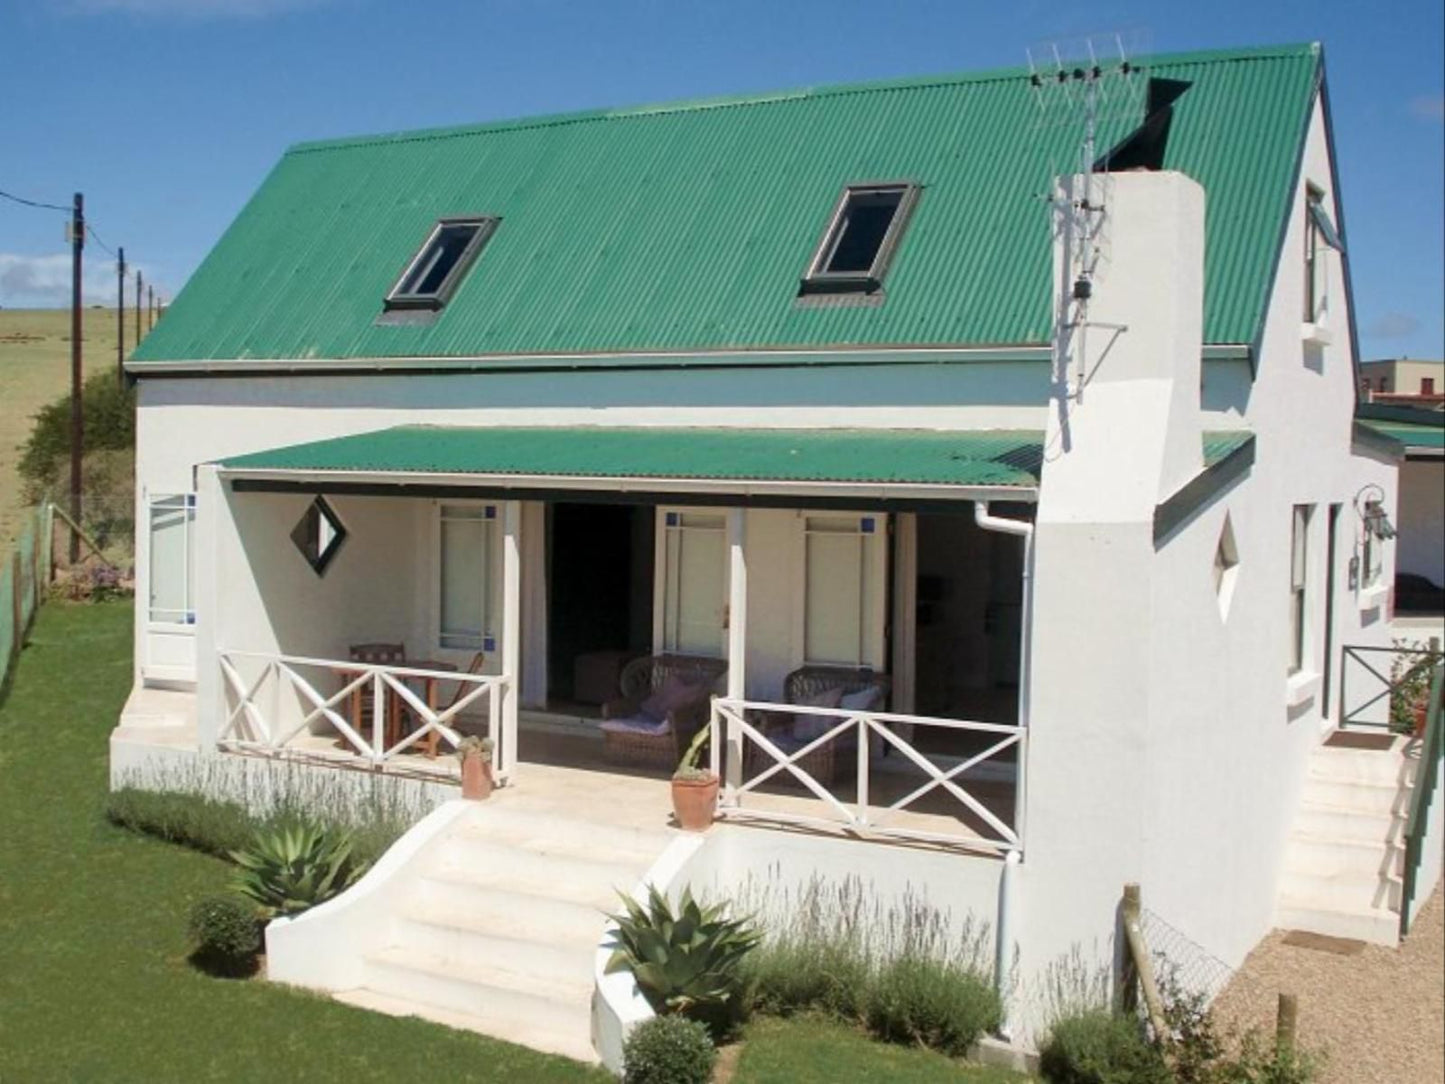 Aloe Cottage Darling Darling Western Cape South Africa Building, Architecture, House